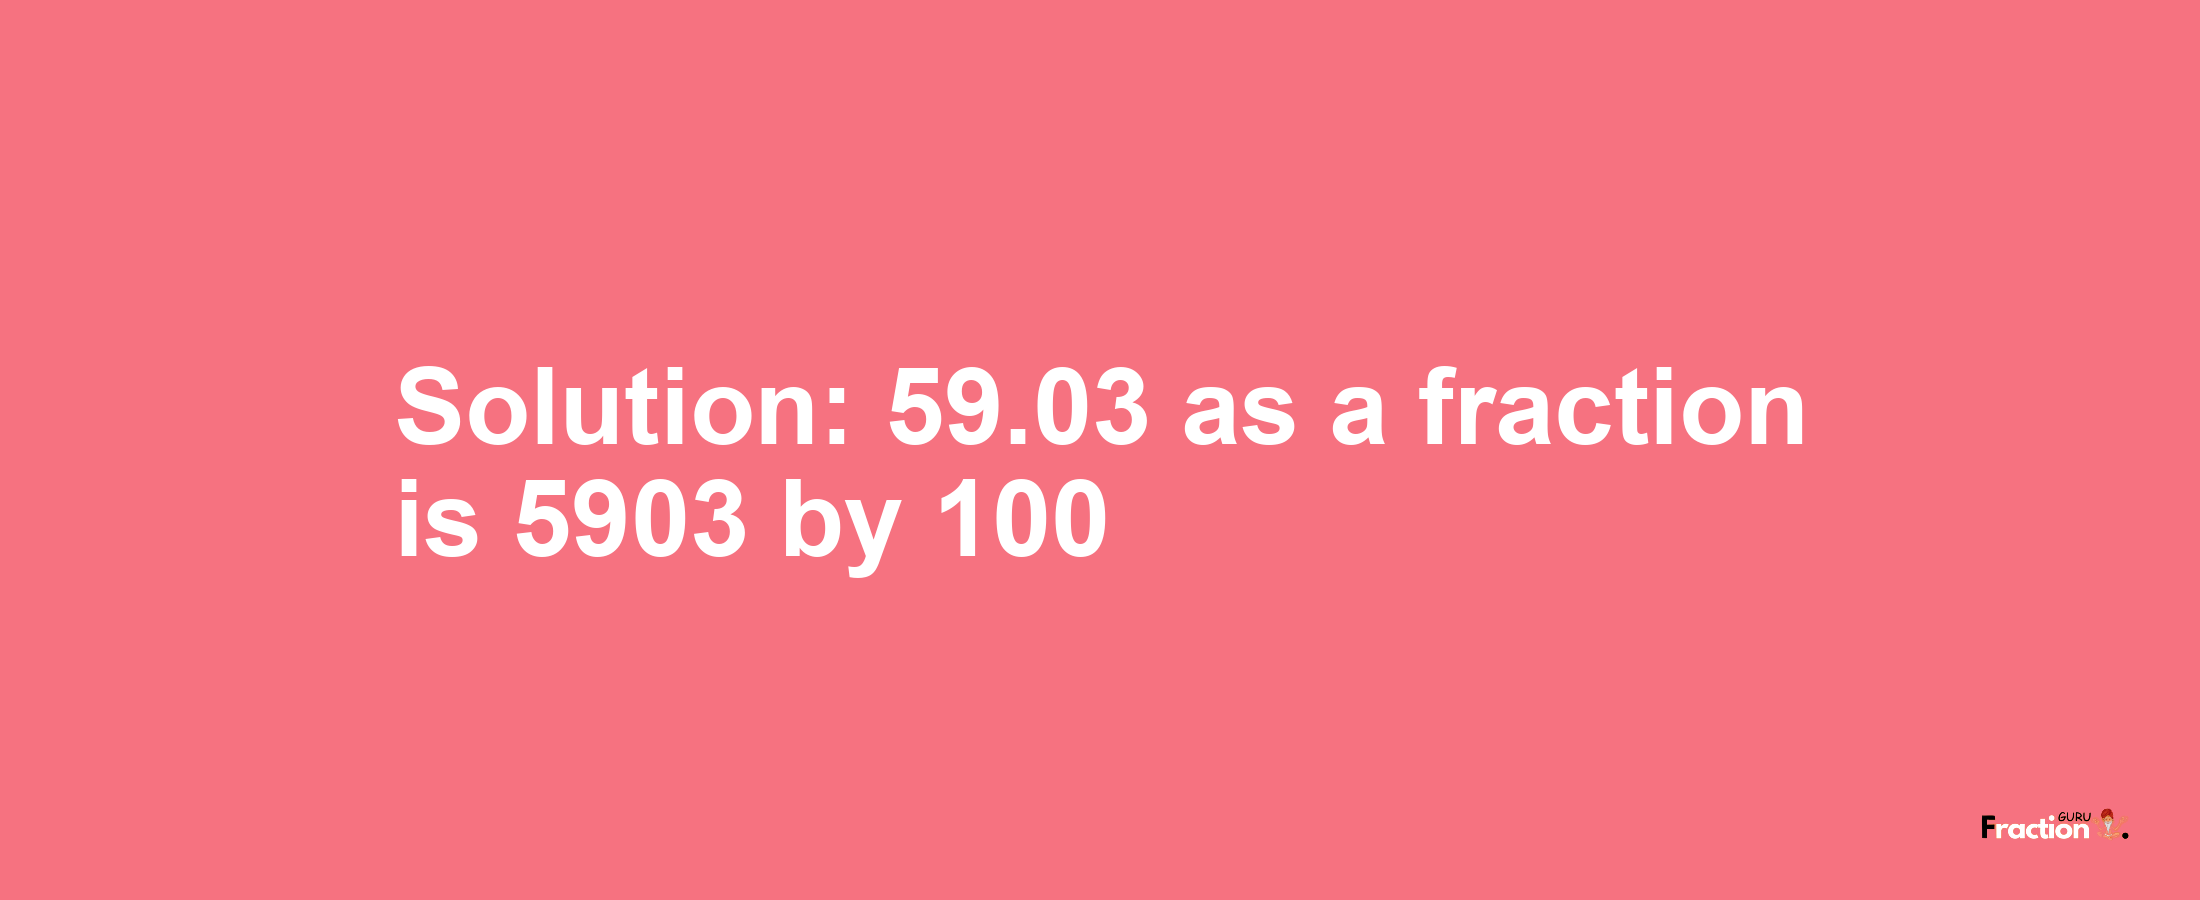 Solution:59.03 as a fraction is 5903/100